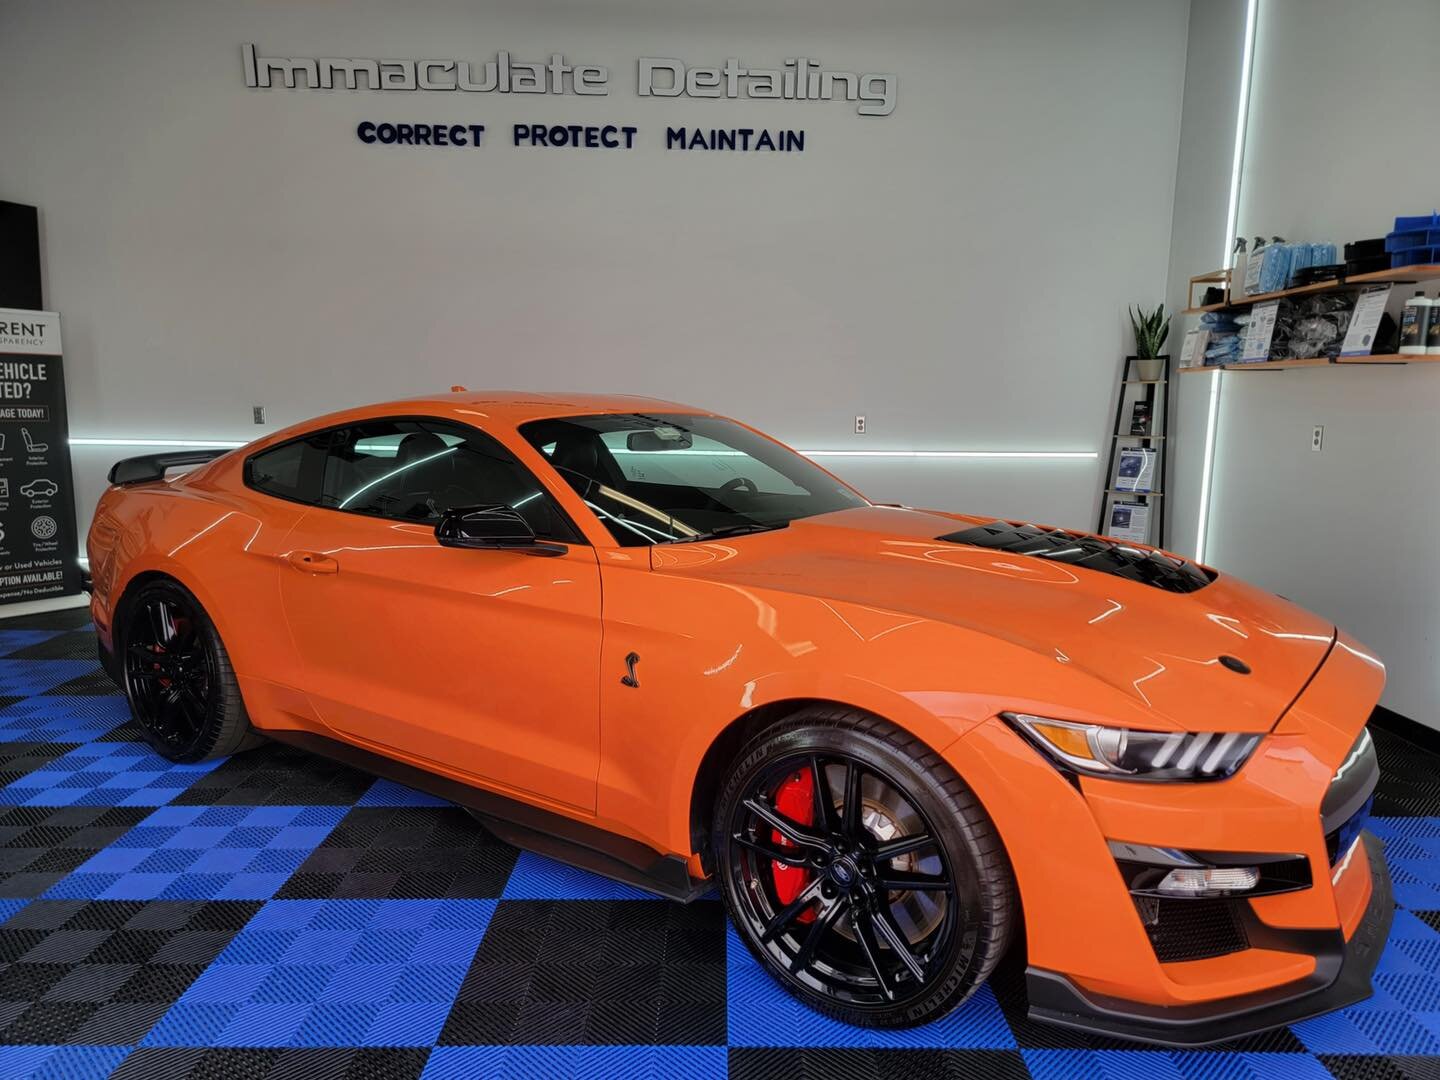 The 2021 Ford Mustang Shelby GT500 is an impressive high-performance muscle car that blends classic style with modern technology. Under the hood, the GT500 is powered by a 5.2-liter V8 engine that produces an incredible 760 horsepower and 625 lb-ft o